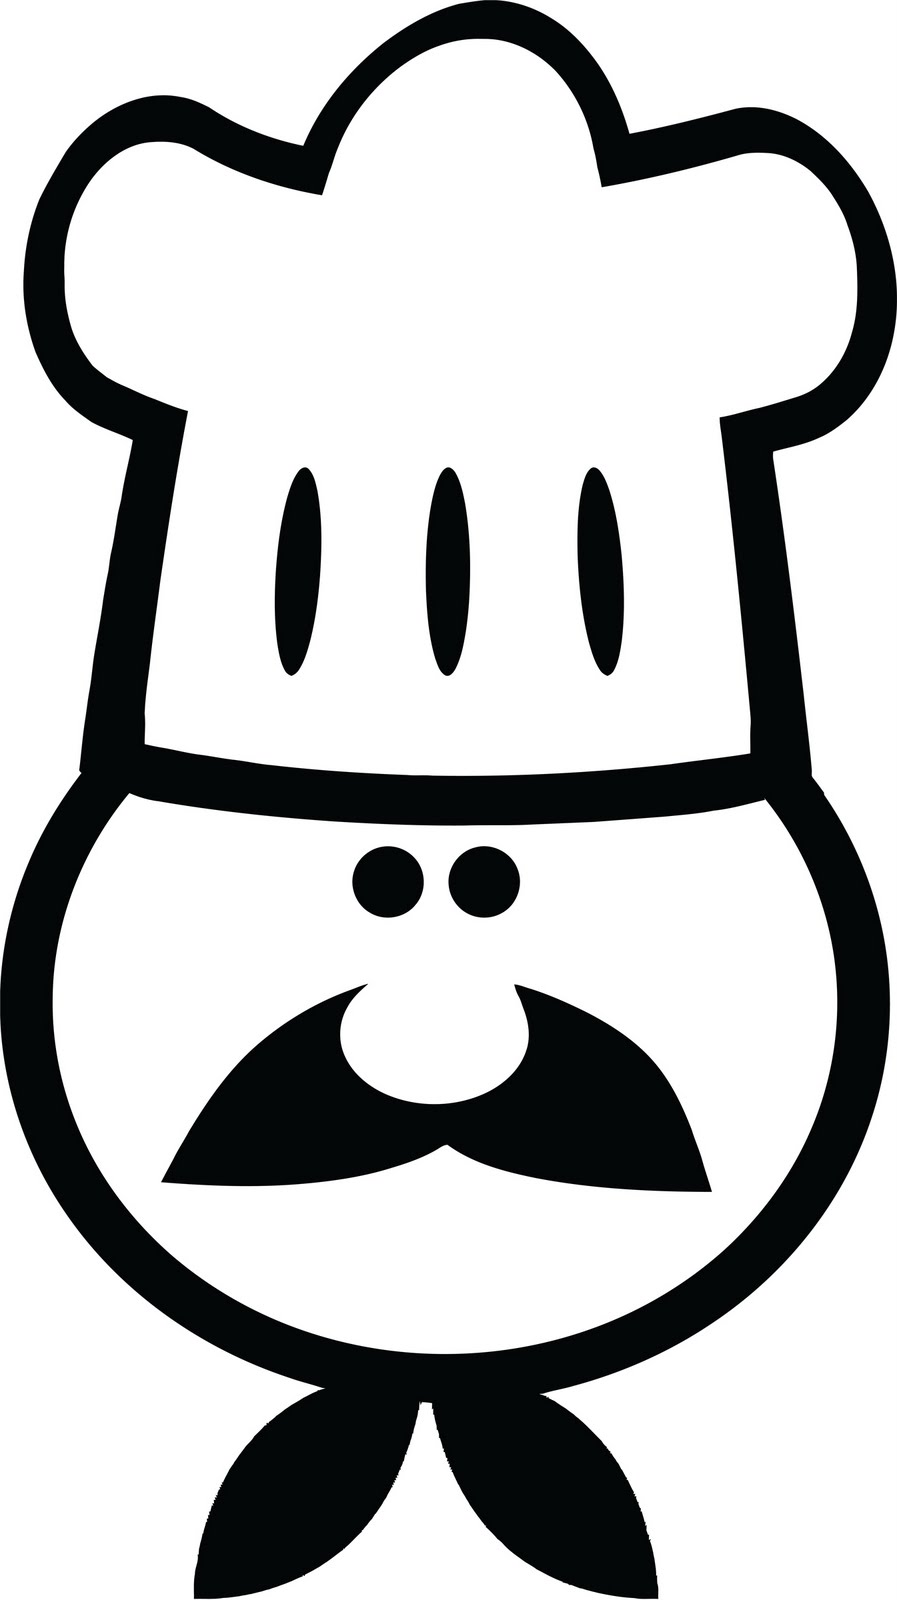 Chef Johnnys Food Facts and More: The Chef's Hat...